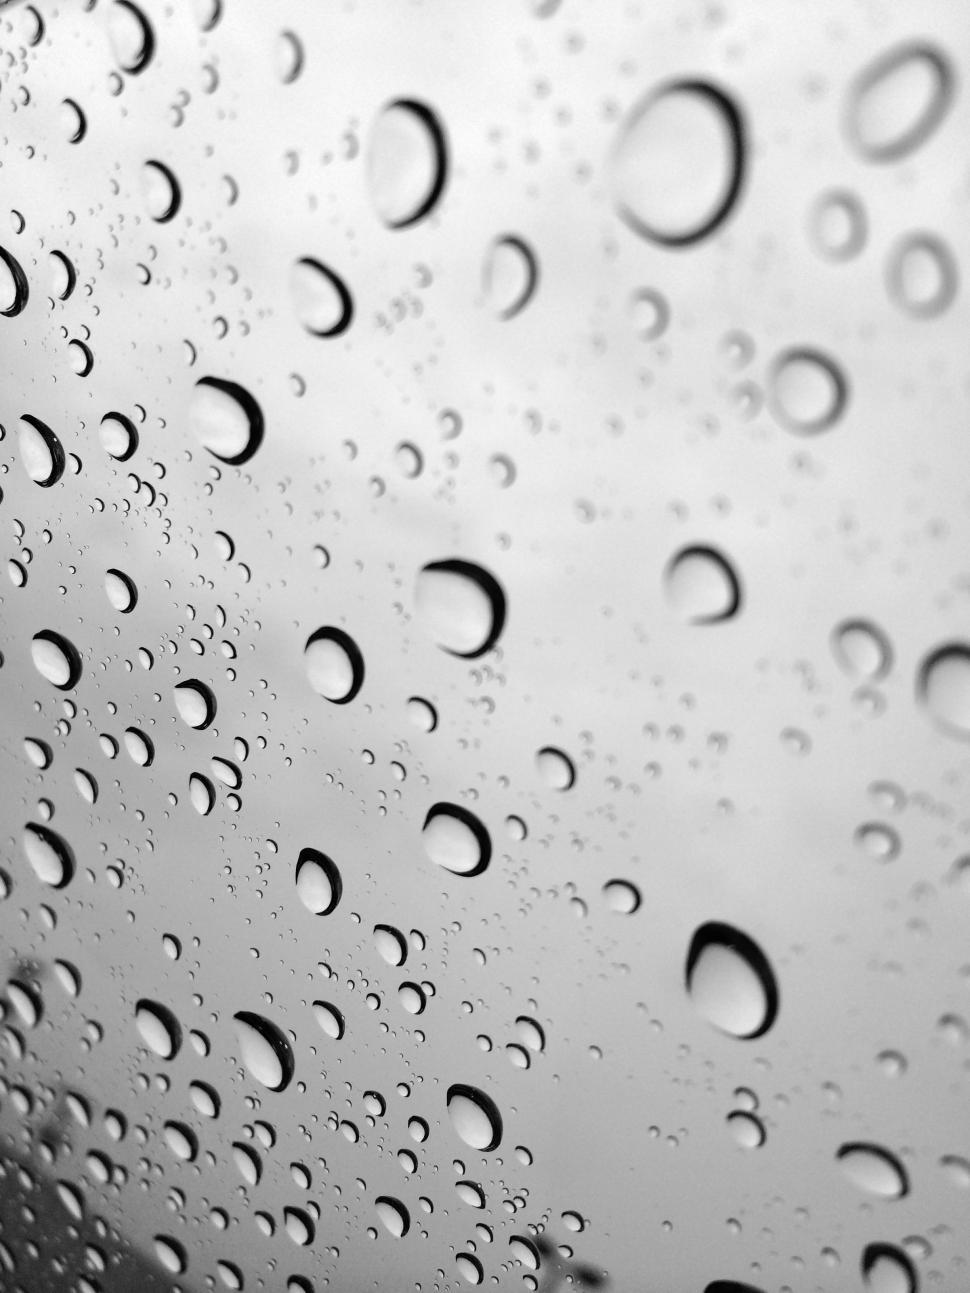 Seamless texture of Drops. Liquid clear droplet. Dew on glass